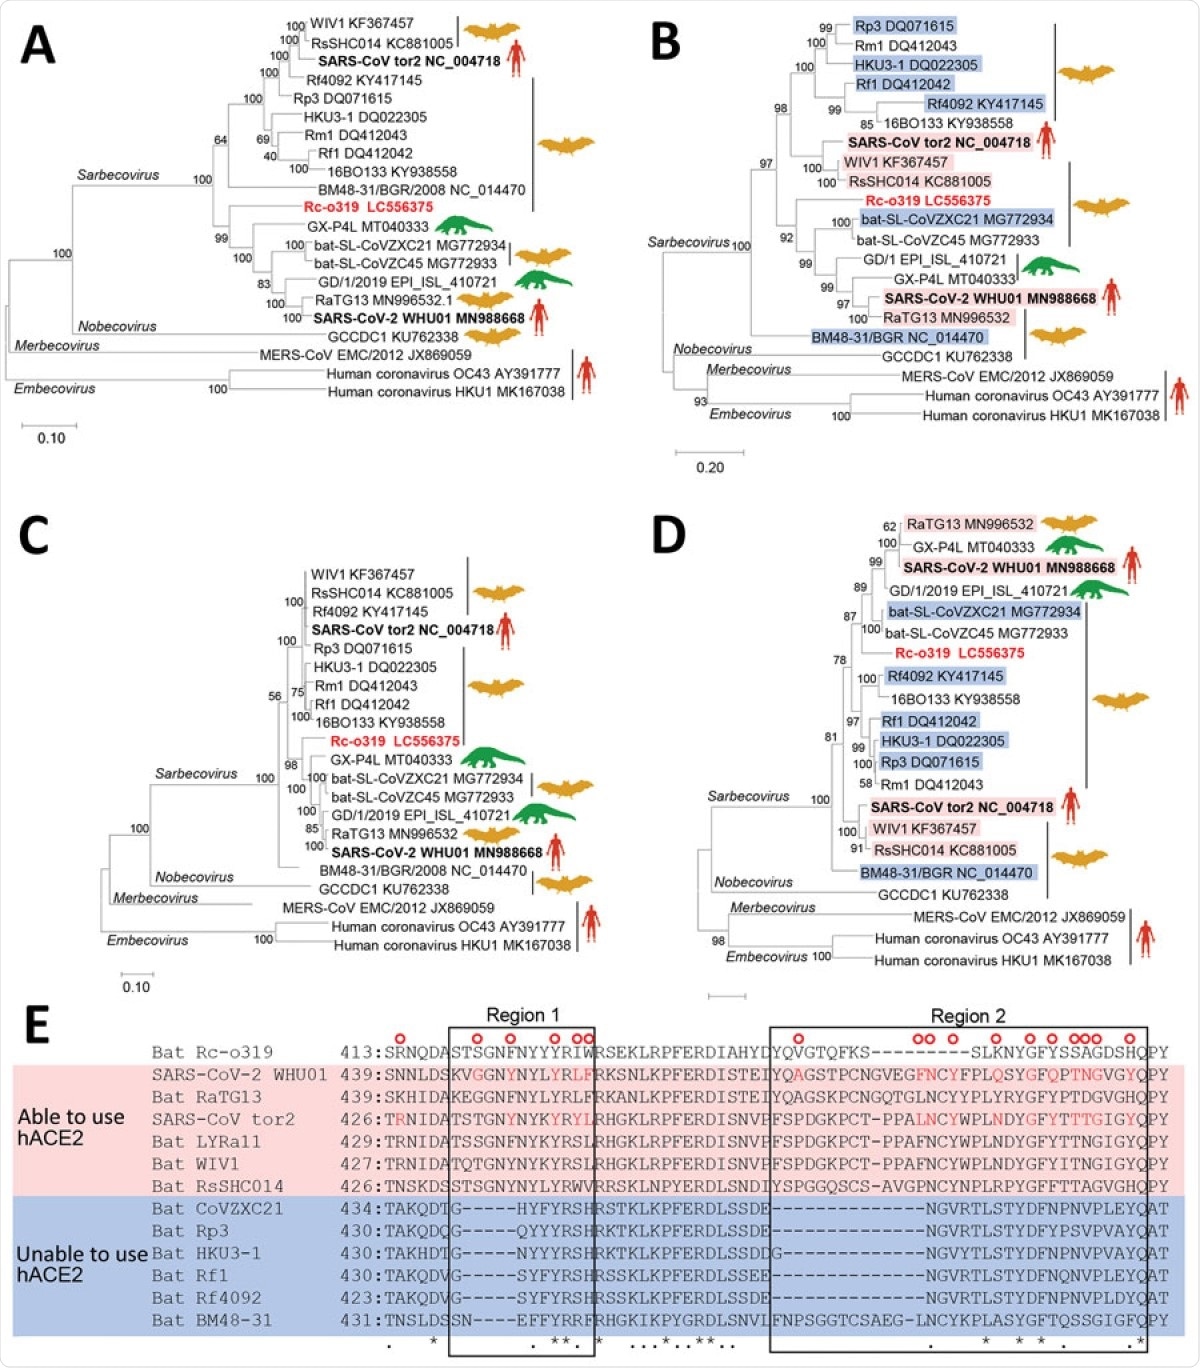 Phylogenetic analysis of sarbecovirus sequenced from little Japanese horseshoe bats (Rhinolophus cornutus) and genetically related to human SARS-CoV-2, Japan. A–D) Phylogenetic trees were generated by using maximum-likelihood analysis combined with 500 bootstrap replicates and show relationships between bat-, human-, and pangolin-derived sarbecoviruses. Phylogenetic trees are shown for nucleotide sequences of the full genome (A), the S protein gene and amino acid sequences (B), the ORF1ab (C), and the S protein (D). Red text indicates positions of Rc-o319, the sarbecovirus sequenced in this study. For panels B and D, magenta bands indicate viruses with S proteins that bind to human ACE2; blue bands indicate viruses with S proteins that do not bind to human ACE2. Bootstrap values are shown above and to the left of the major nodes. Scale bars indicate nucleotide or amino acid substitutions per site. E) Amino acid sequence alignment of the RBM of S proteins that are able or unable to bind to human ACE2. Amino acid residues of the RBM that contact human ACE2 of SARS-CoV-2 and SARS-CoV are indicated in the upper side by red circles. The 2 regions of S protein RBM known to interact with human ACE2 are indicated by boxes labeled region 1 and region 2. ACE2, angiotensin-converting enzyme 2; hACE2, human angiotensin-converting enzyme 2; ORF1ab, open reading frame 1ab; RBM, receptor-binding motif; S, spike protein; SARS-CoV, severe acute respiratory syndrome coronavirus; SARS-CoV-2, severe acute respiratory syndrome coronavirus 2.